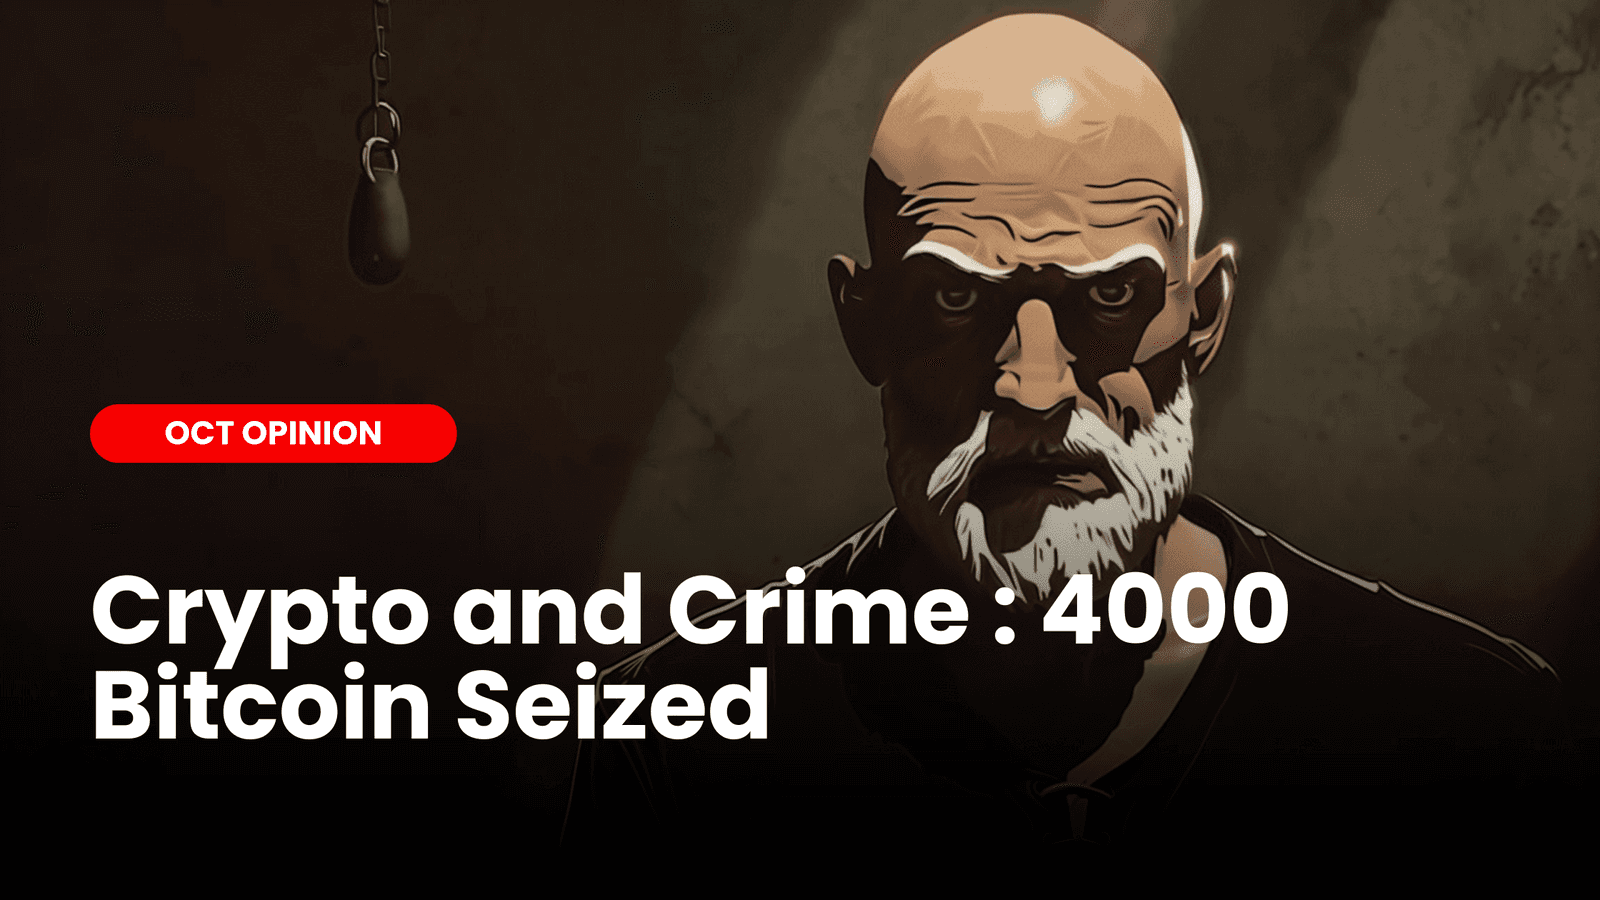 Crypto and Crime : The Intersection of Opportunity and Misuse